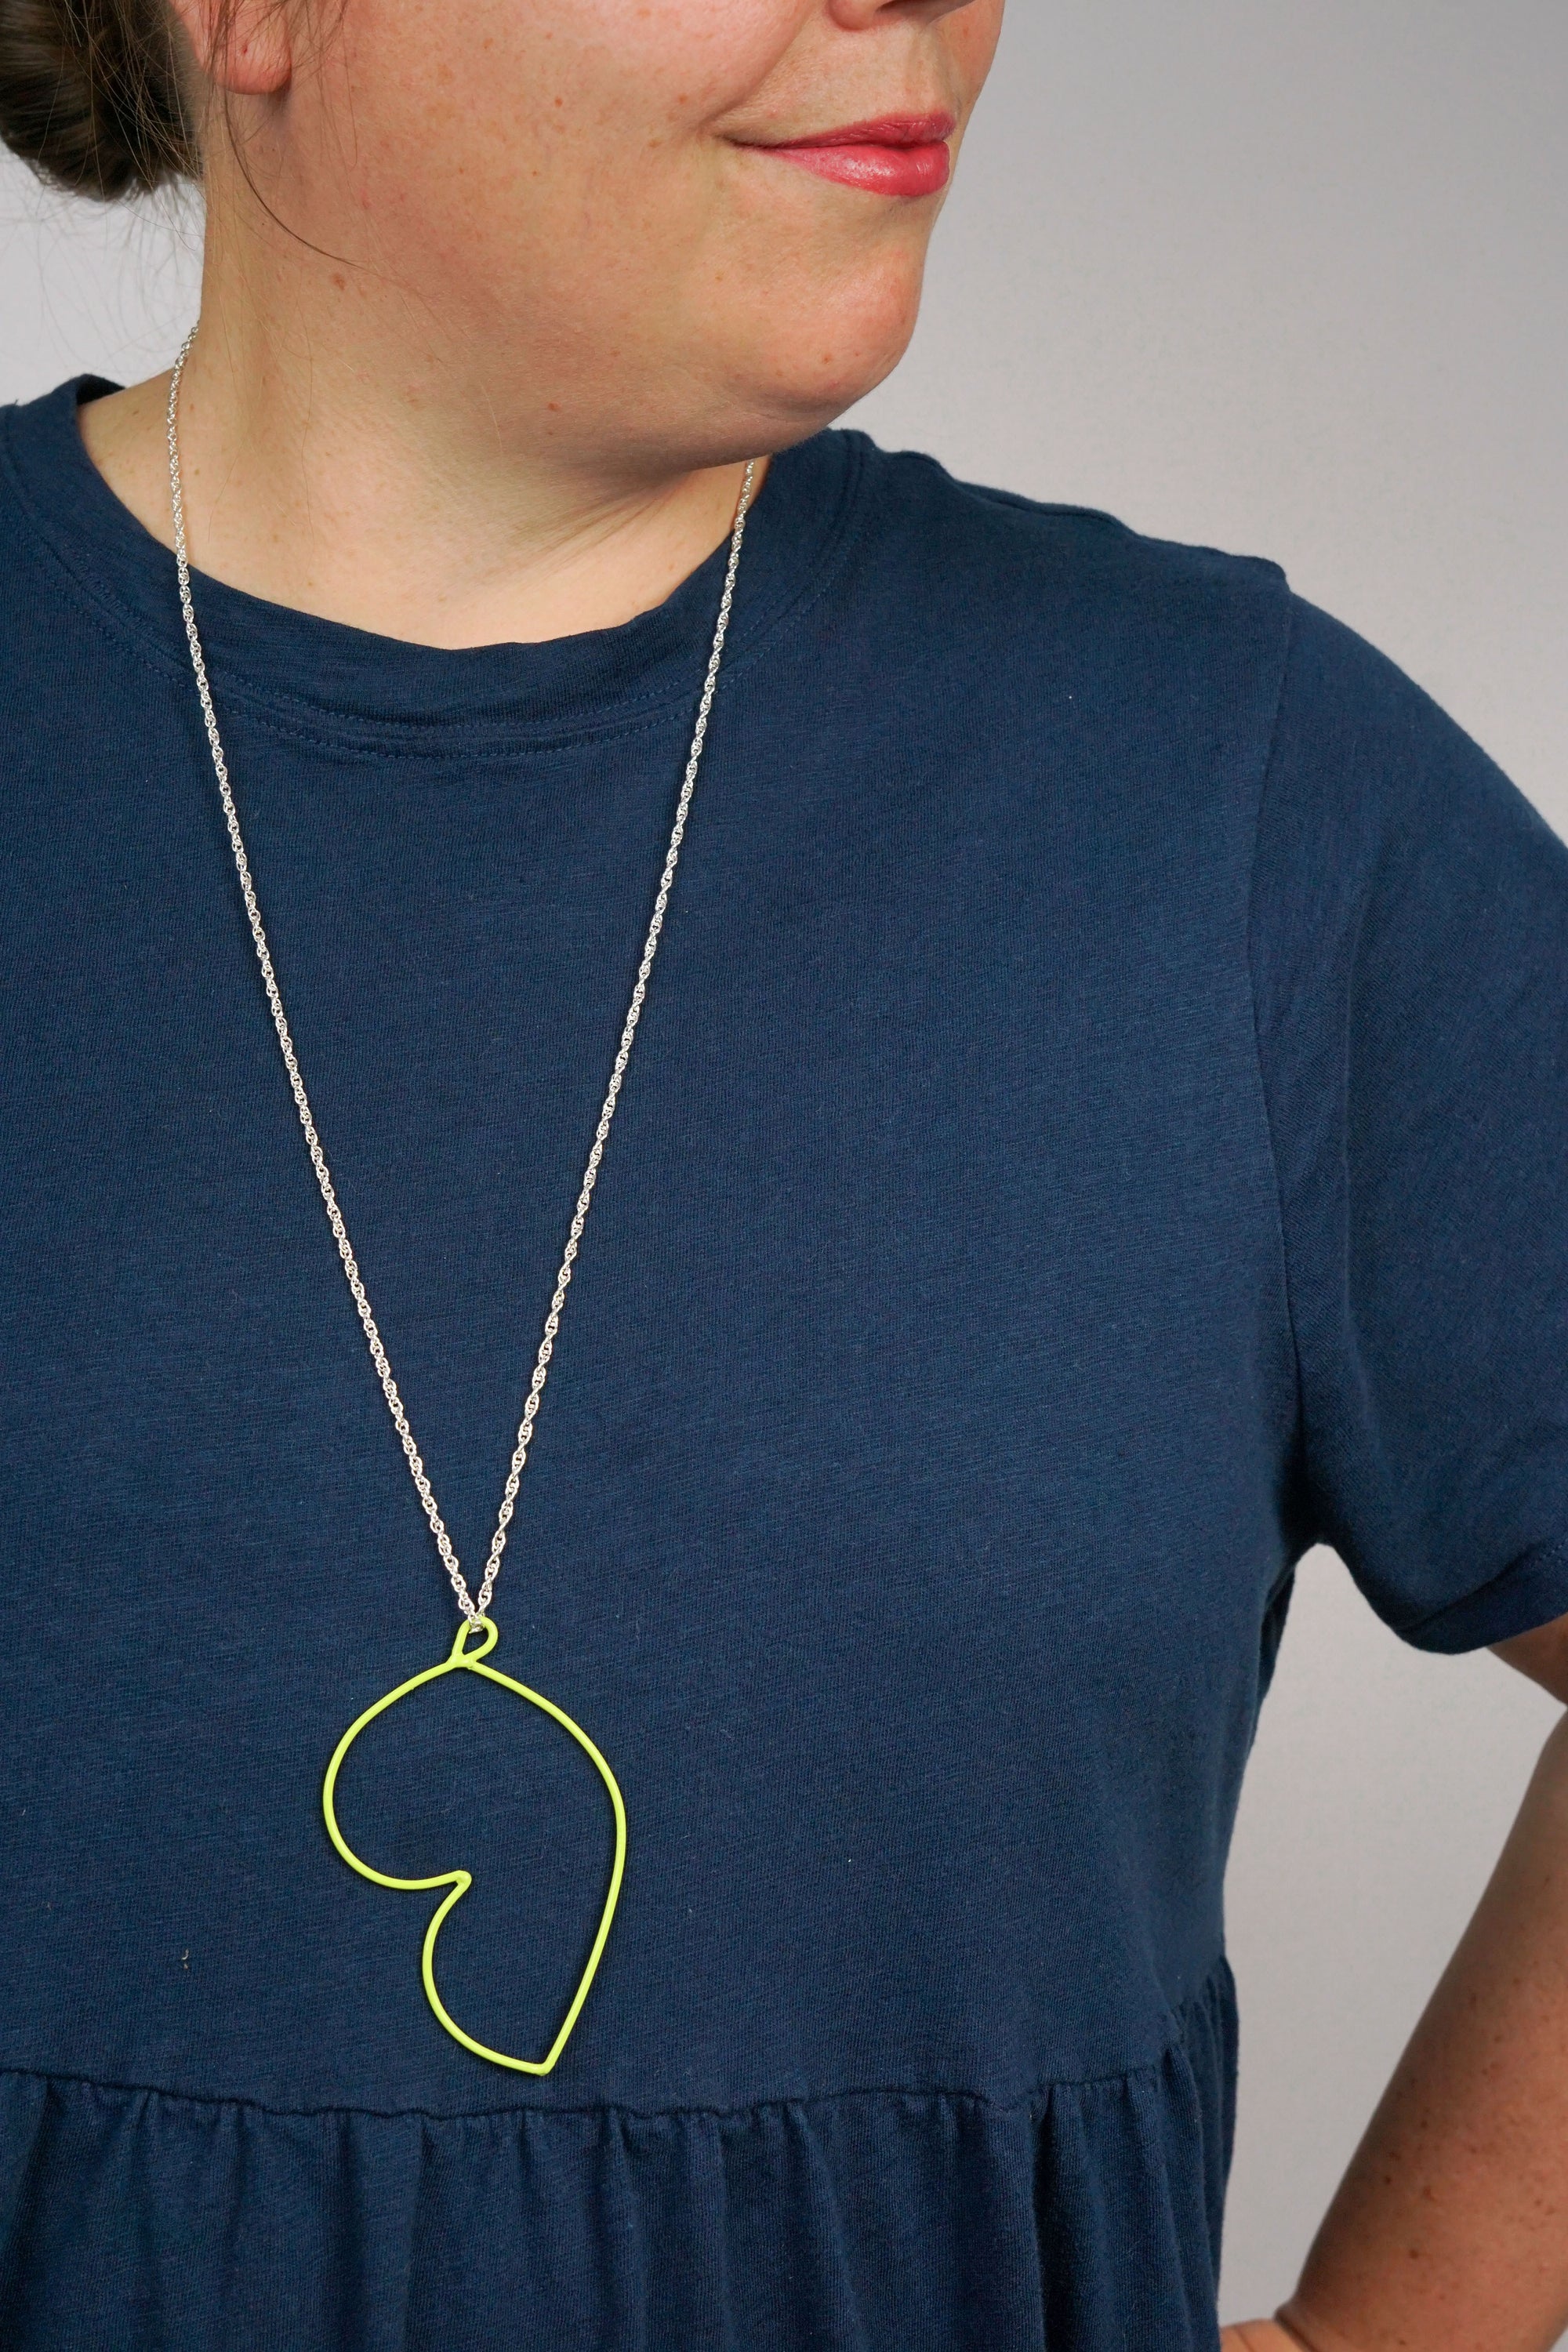 Volupte long necklace in Neon Chartreuse